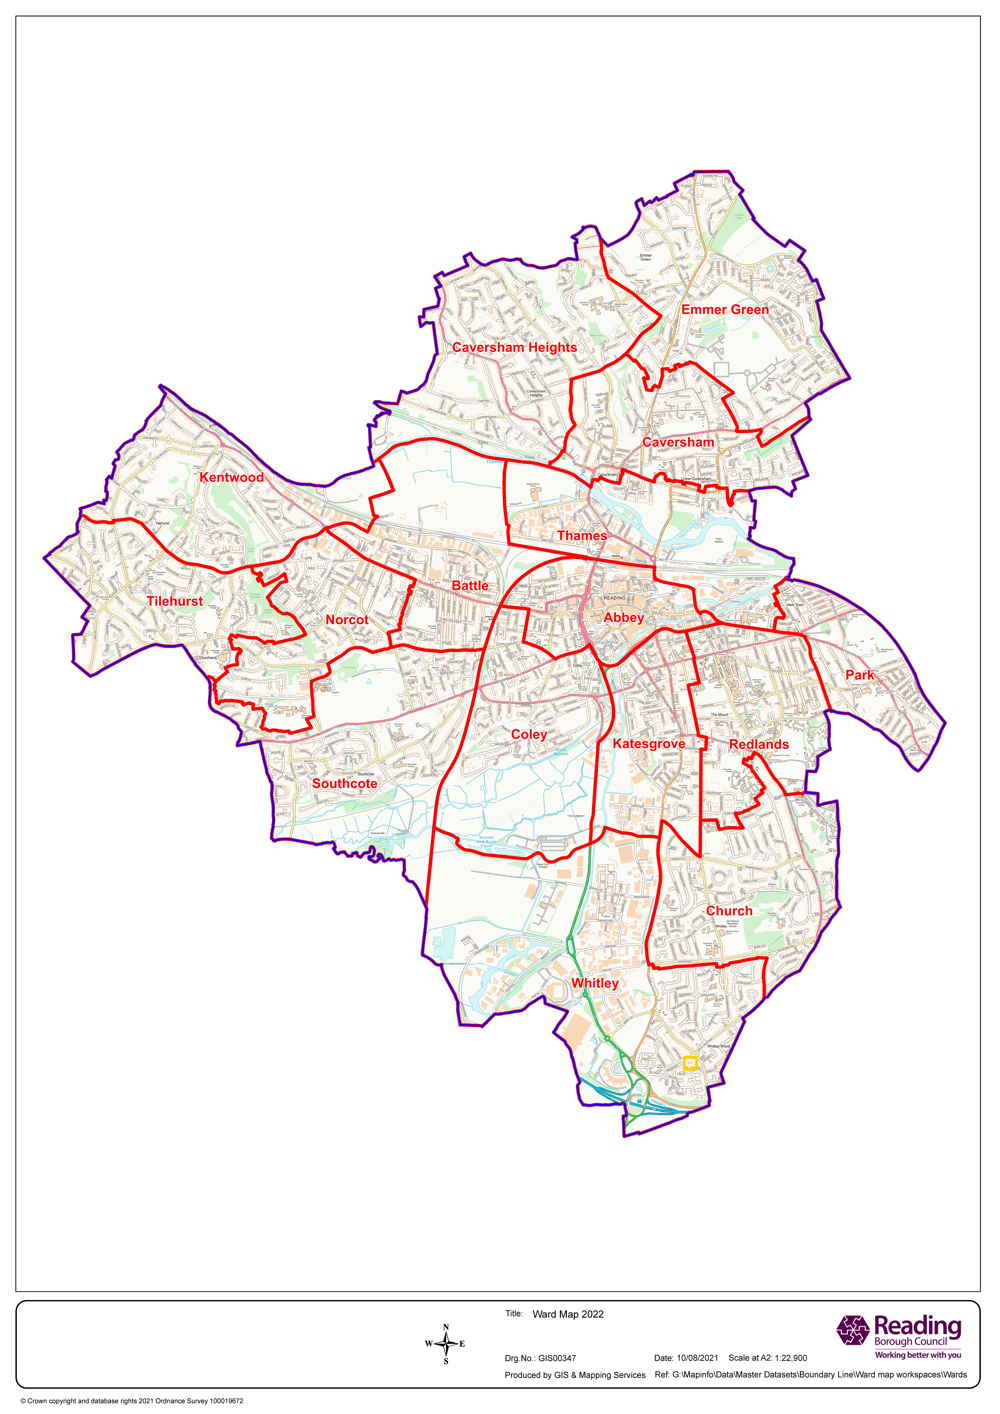 Map showing wards of Reading Borough Council